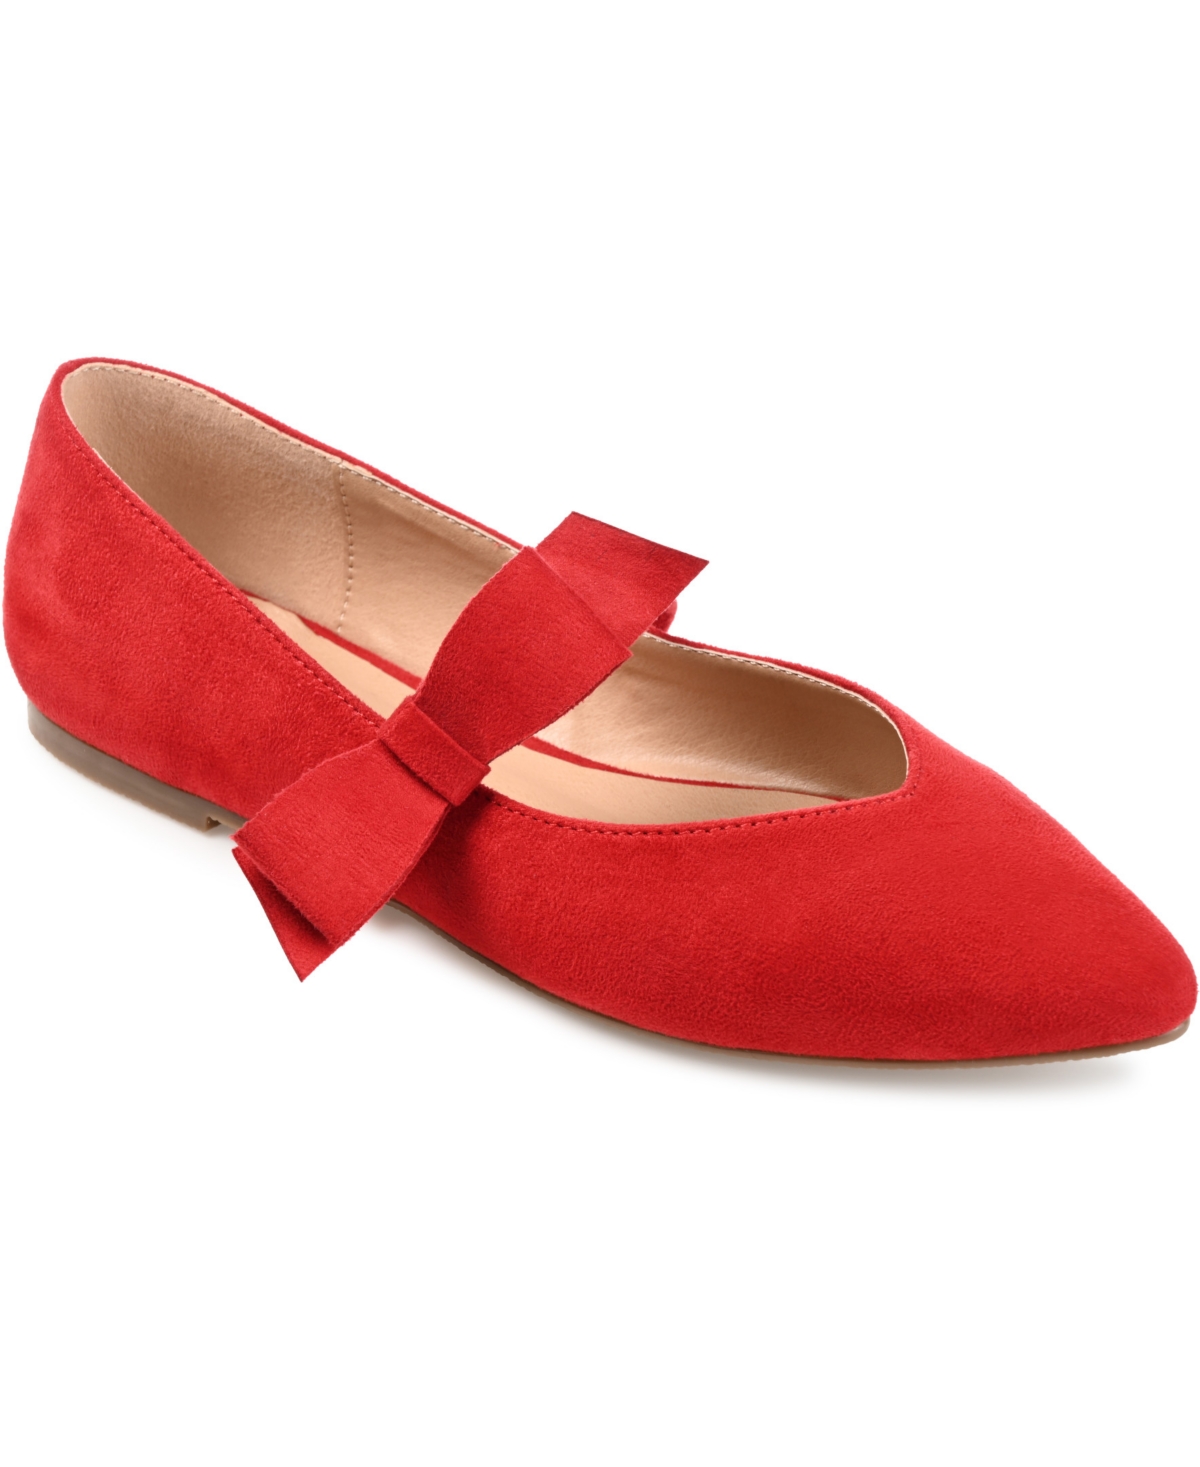 Vintage Shoes, Vintage Style Shoes Journee Collection Womens Aizlynn Mary Jane Flats - Red $56.24 AT vintagedancer.com